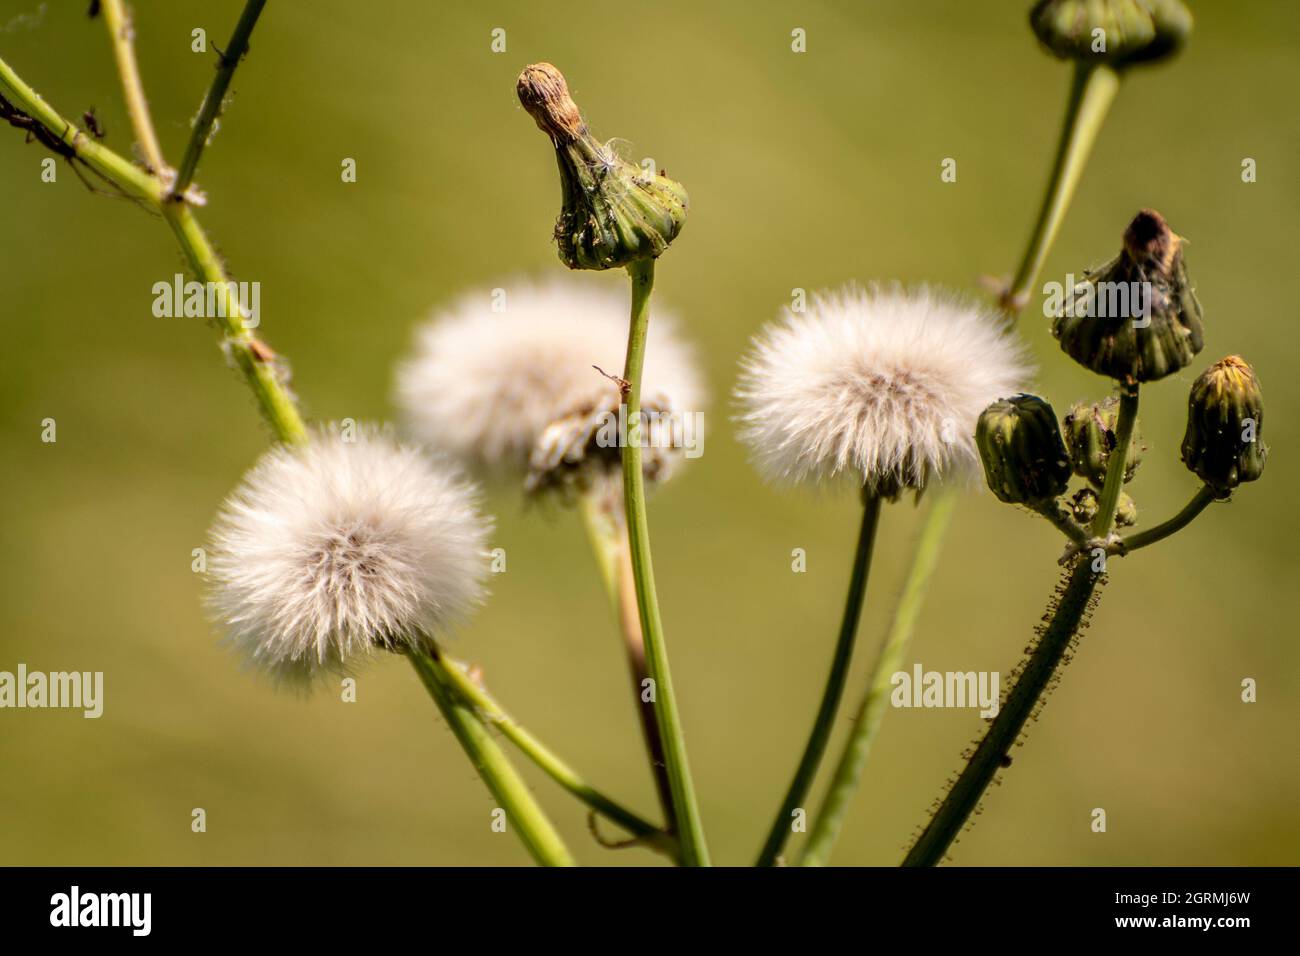 Sonchus oleraceus flowers in the foreground Stock Photo